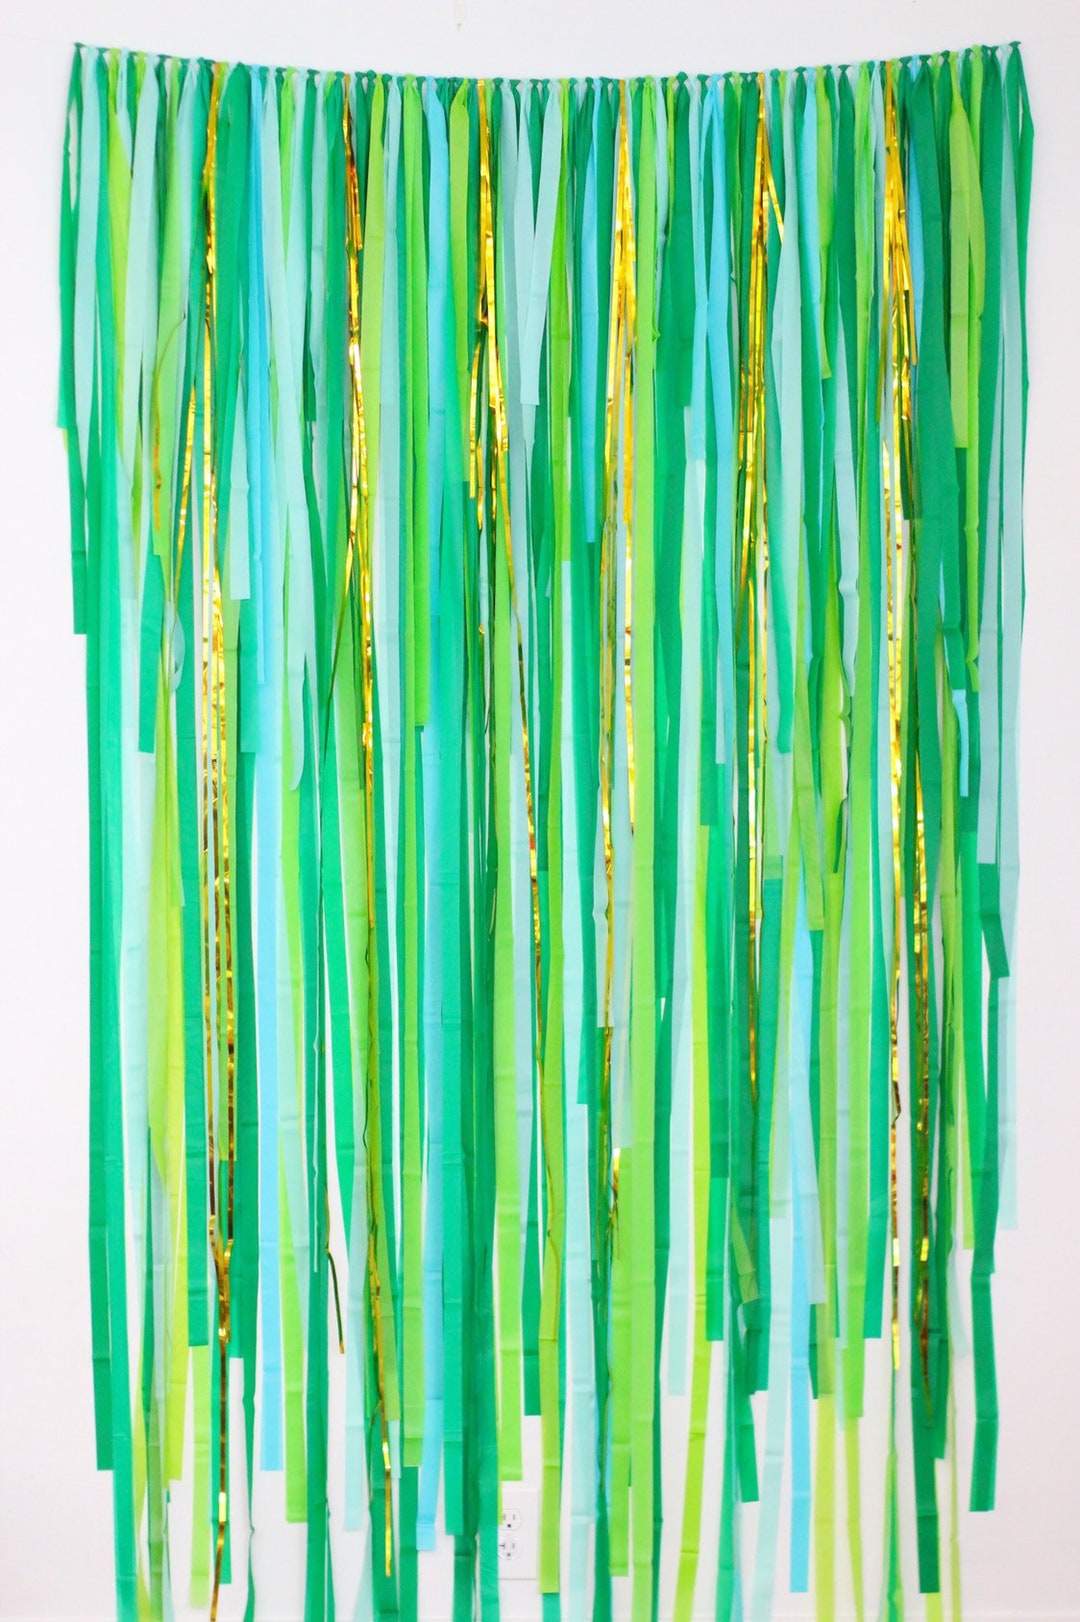  KatchOn, XtraLarge Green Streamer Backdrop - 8x3.2 Feet, Pack  of 2, Green Fringe Curtain for Jungle Party Decorations, Green Streamers  Party Decorations